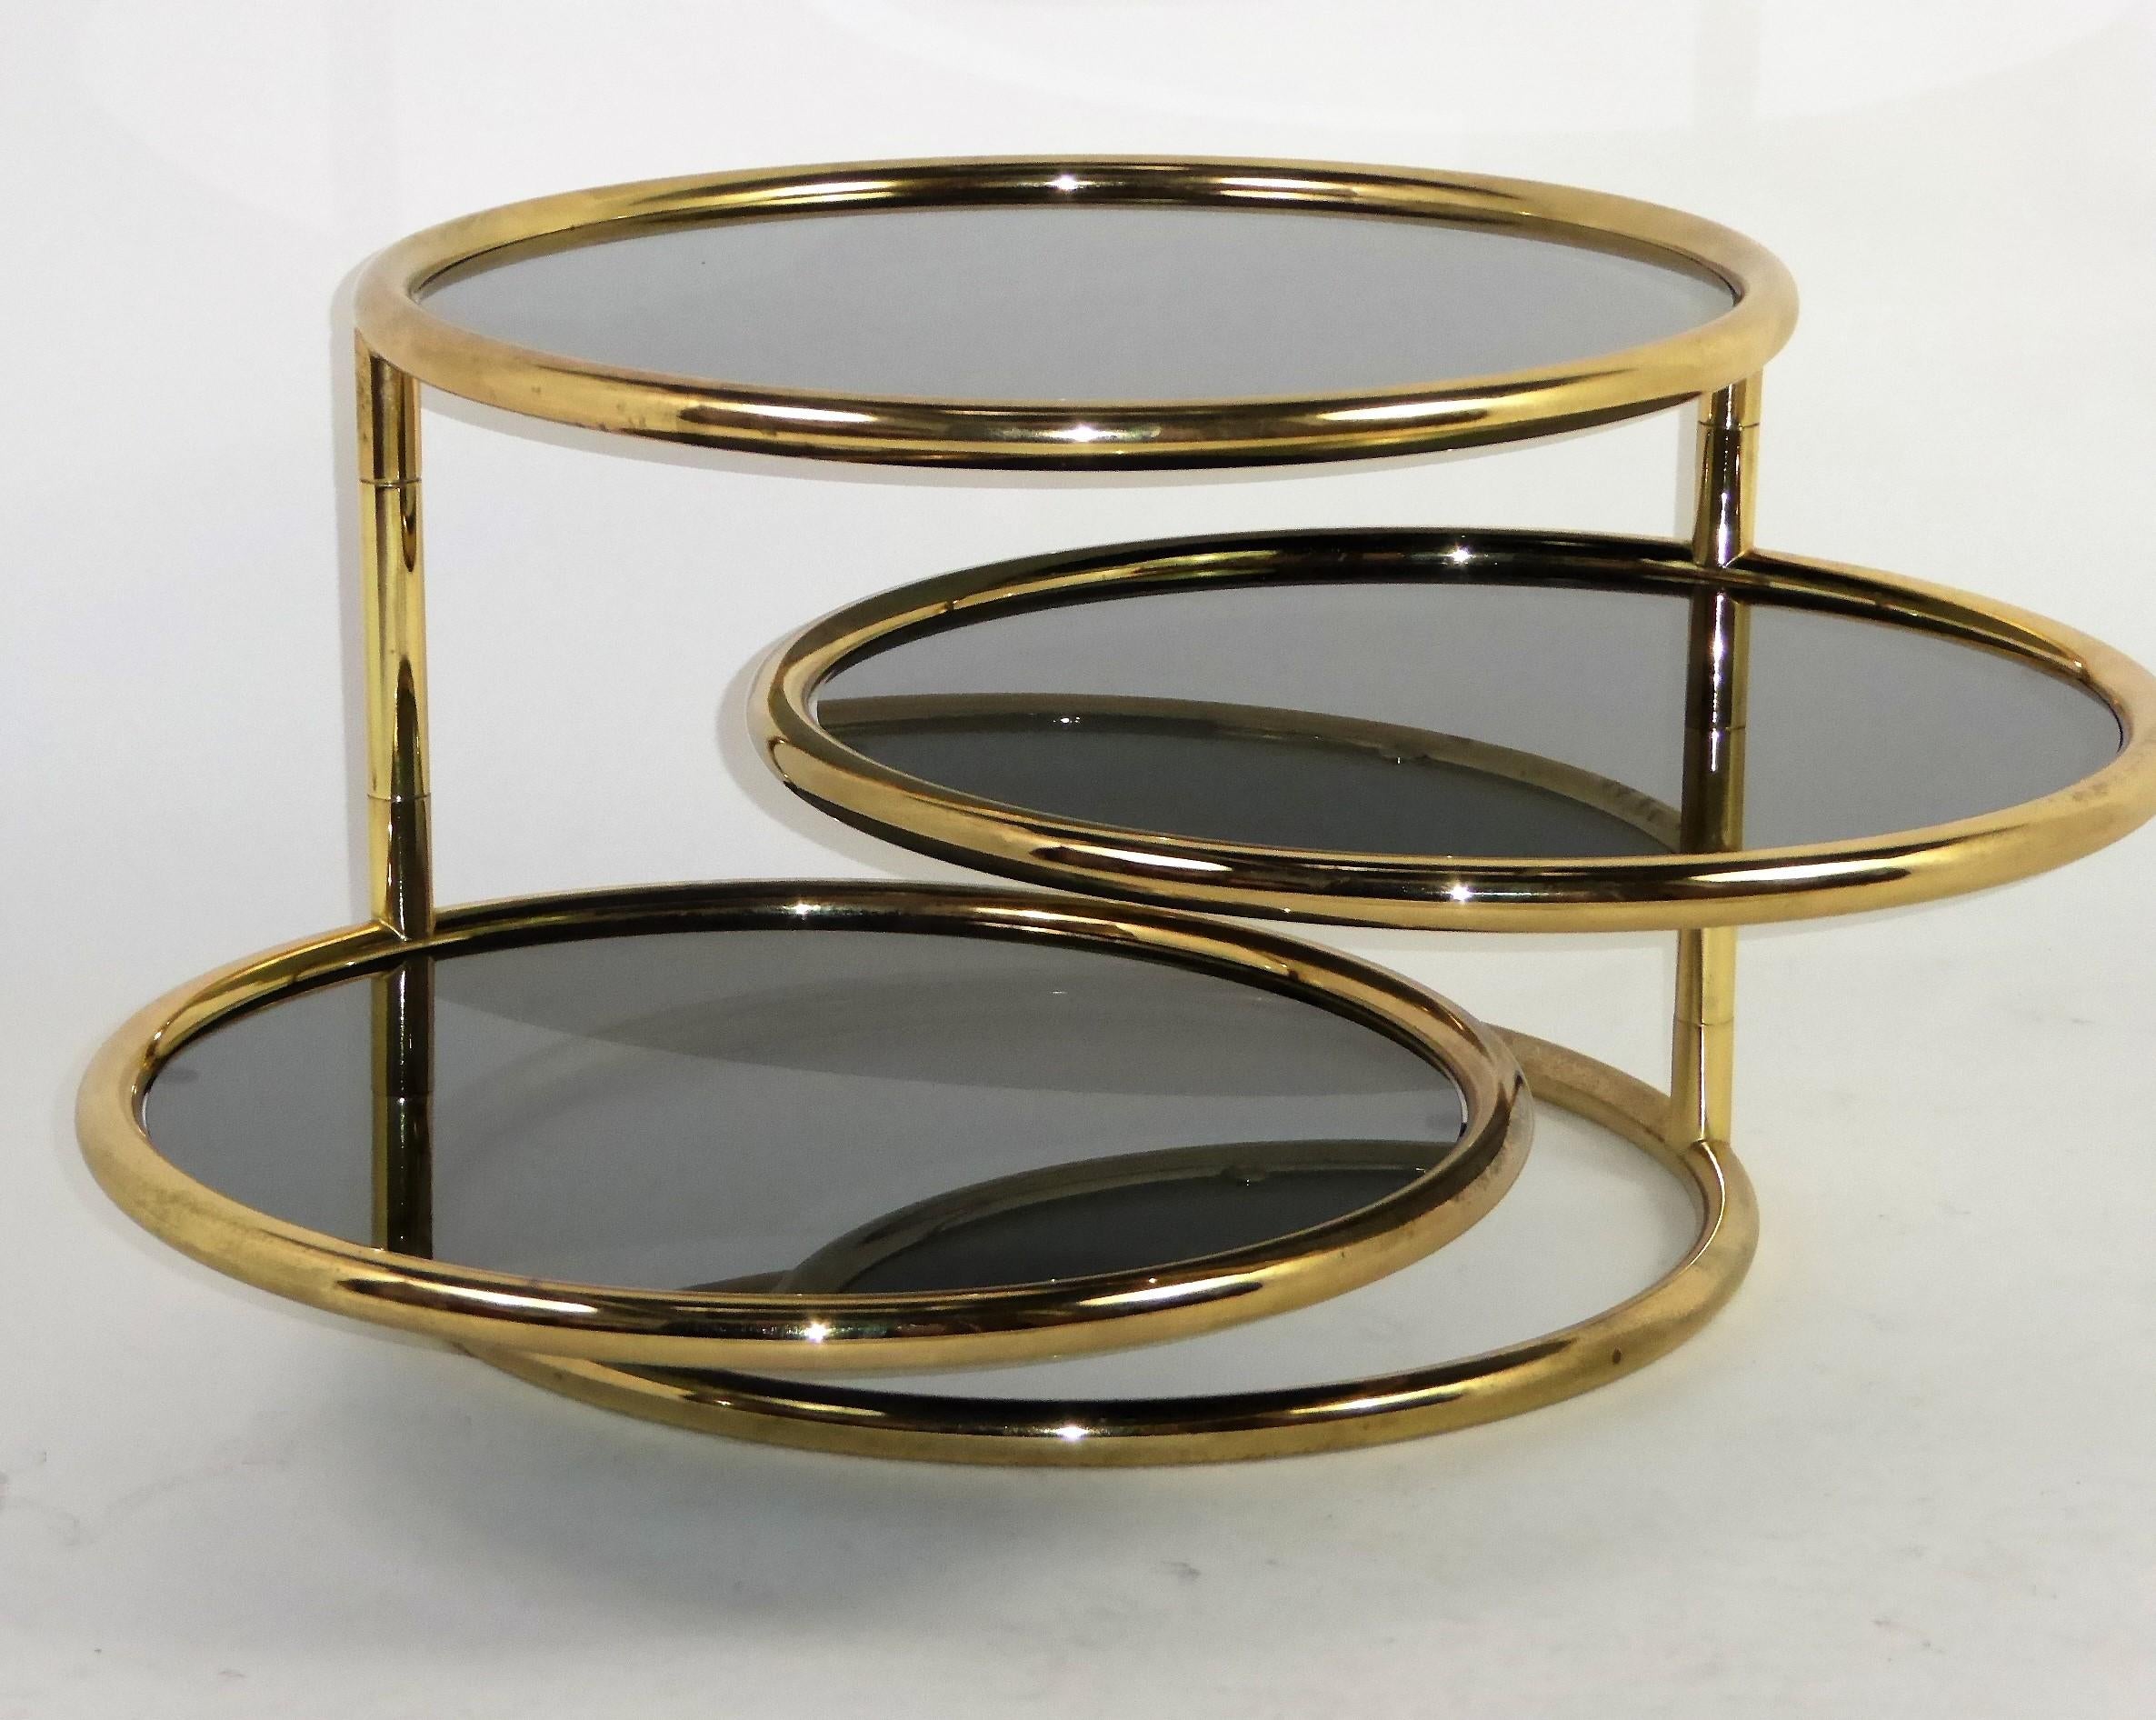 1970s Milo Baughman attributed Tubular brass and dark Smoked Glass Swiveling Coffee Table. A Cocktail Table that transforms itself by swiveling out the two movable tiers to any angle desired. The brass with an age darkening that adds to its